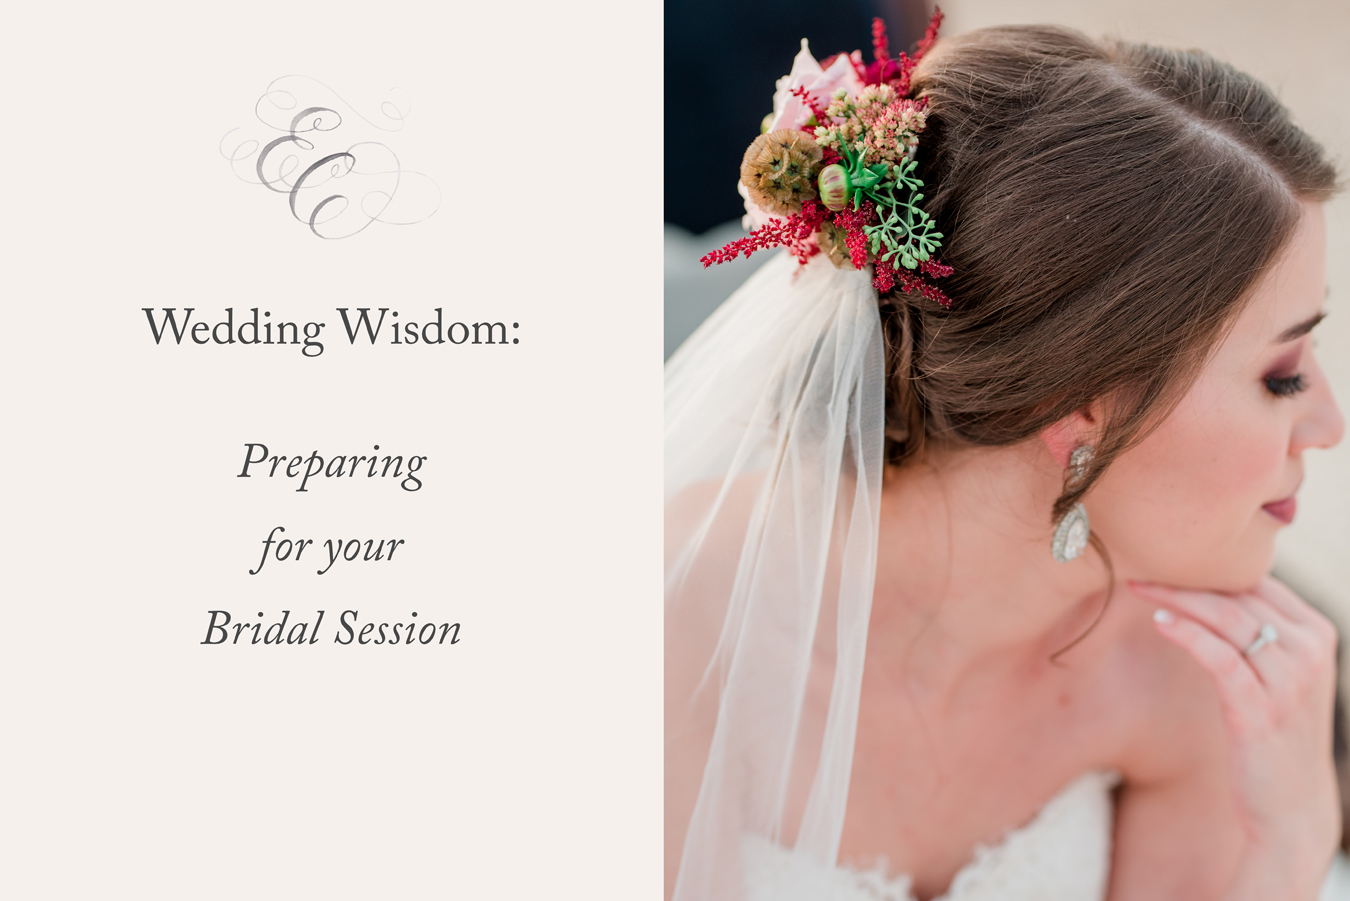 Preparing for Your Bridal Session